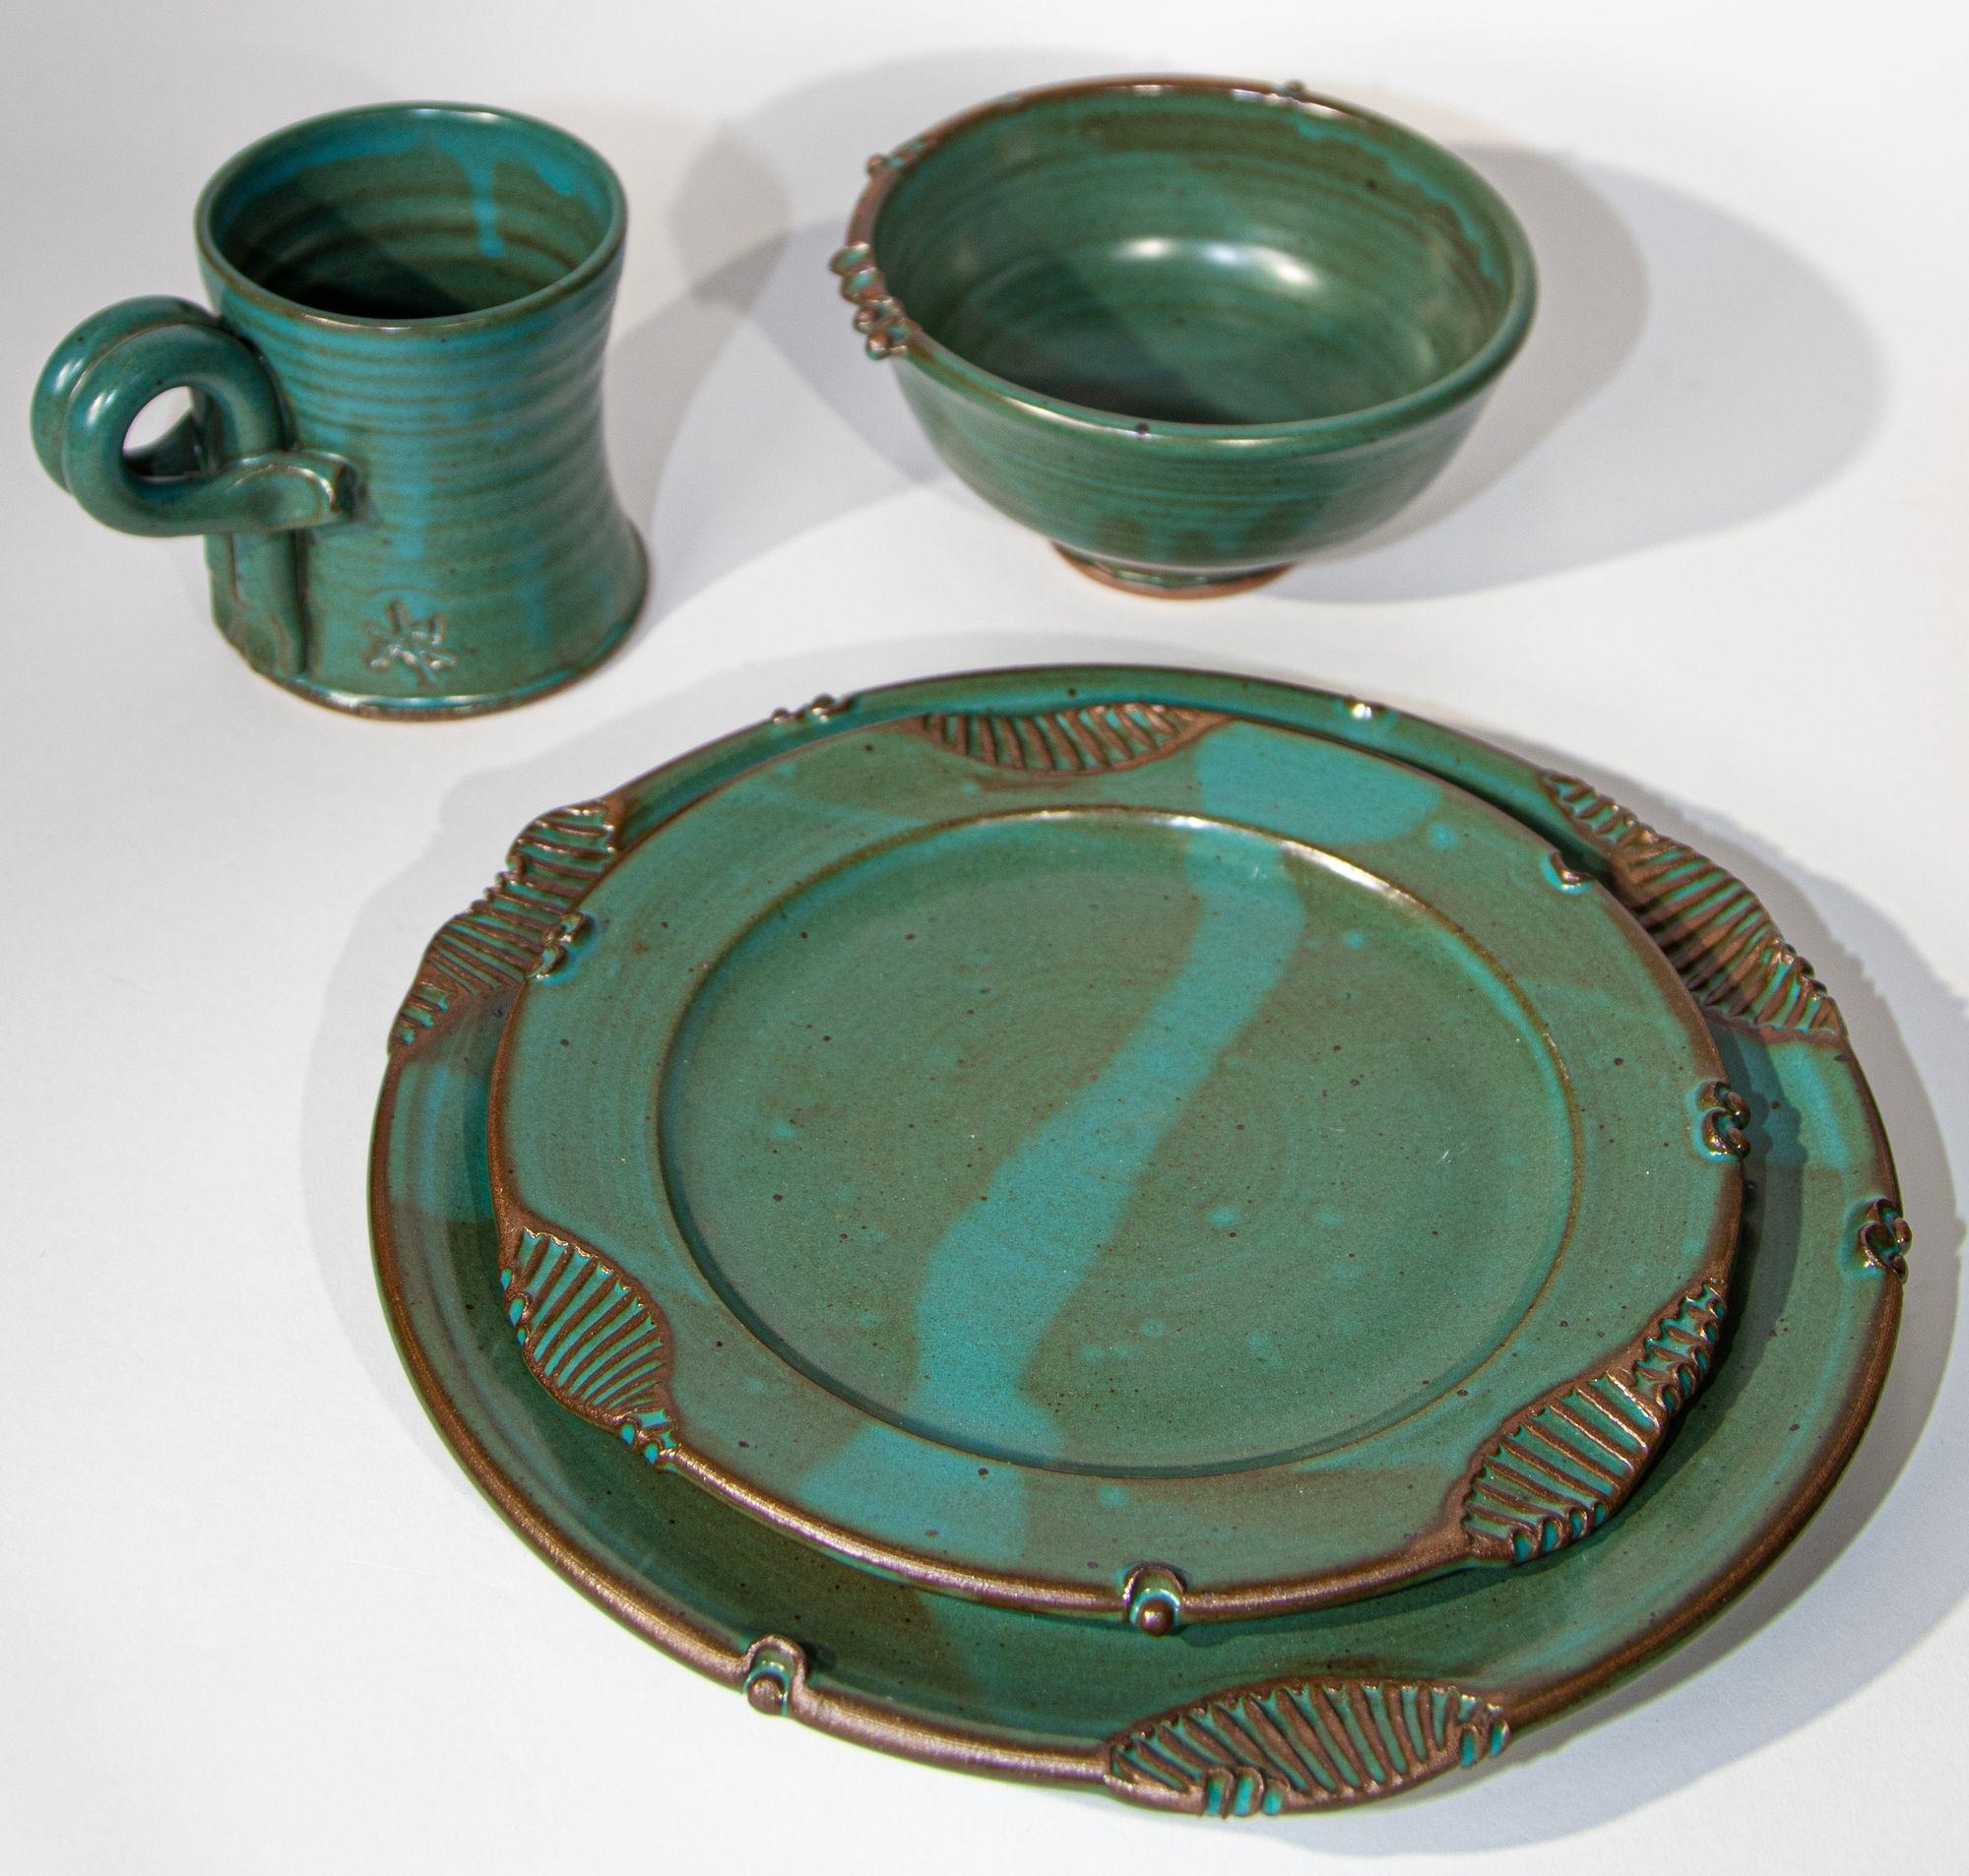 Paul Anthony Vintage Teal Green Stoneware Service Set of 8.
Paul Anthony Modernist Studio Art Pottery Stoneware set for 2, 2 dinner plates, 2 salad plates and 2 Cereal bowls 2 mugs.
Colors are green and teal.
Vintage signed Paul Anthony Abstract